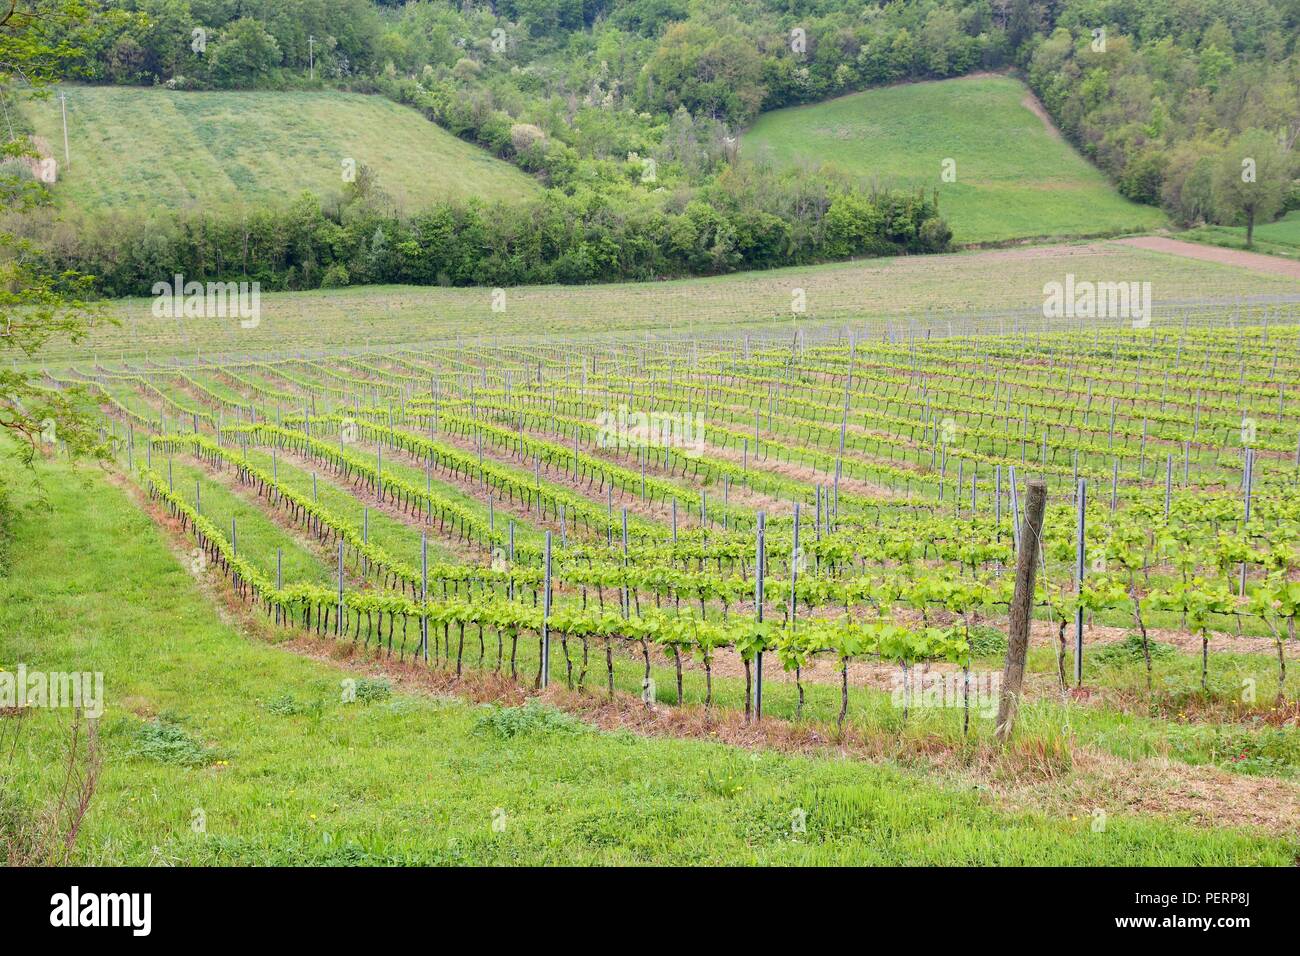 Vineyards in Tuscany - rural Italy. Agricultural area in the province of Siena. Stock Photo